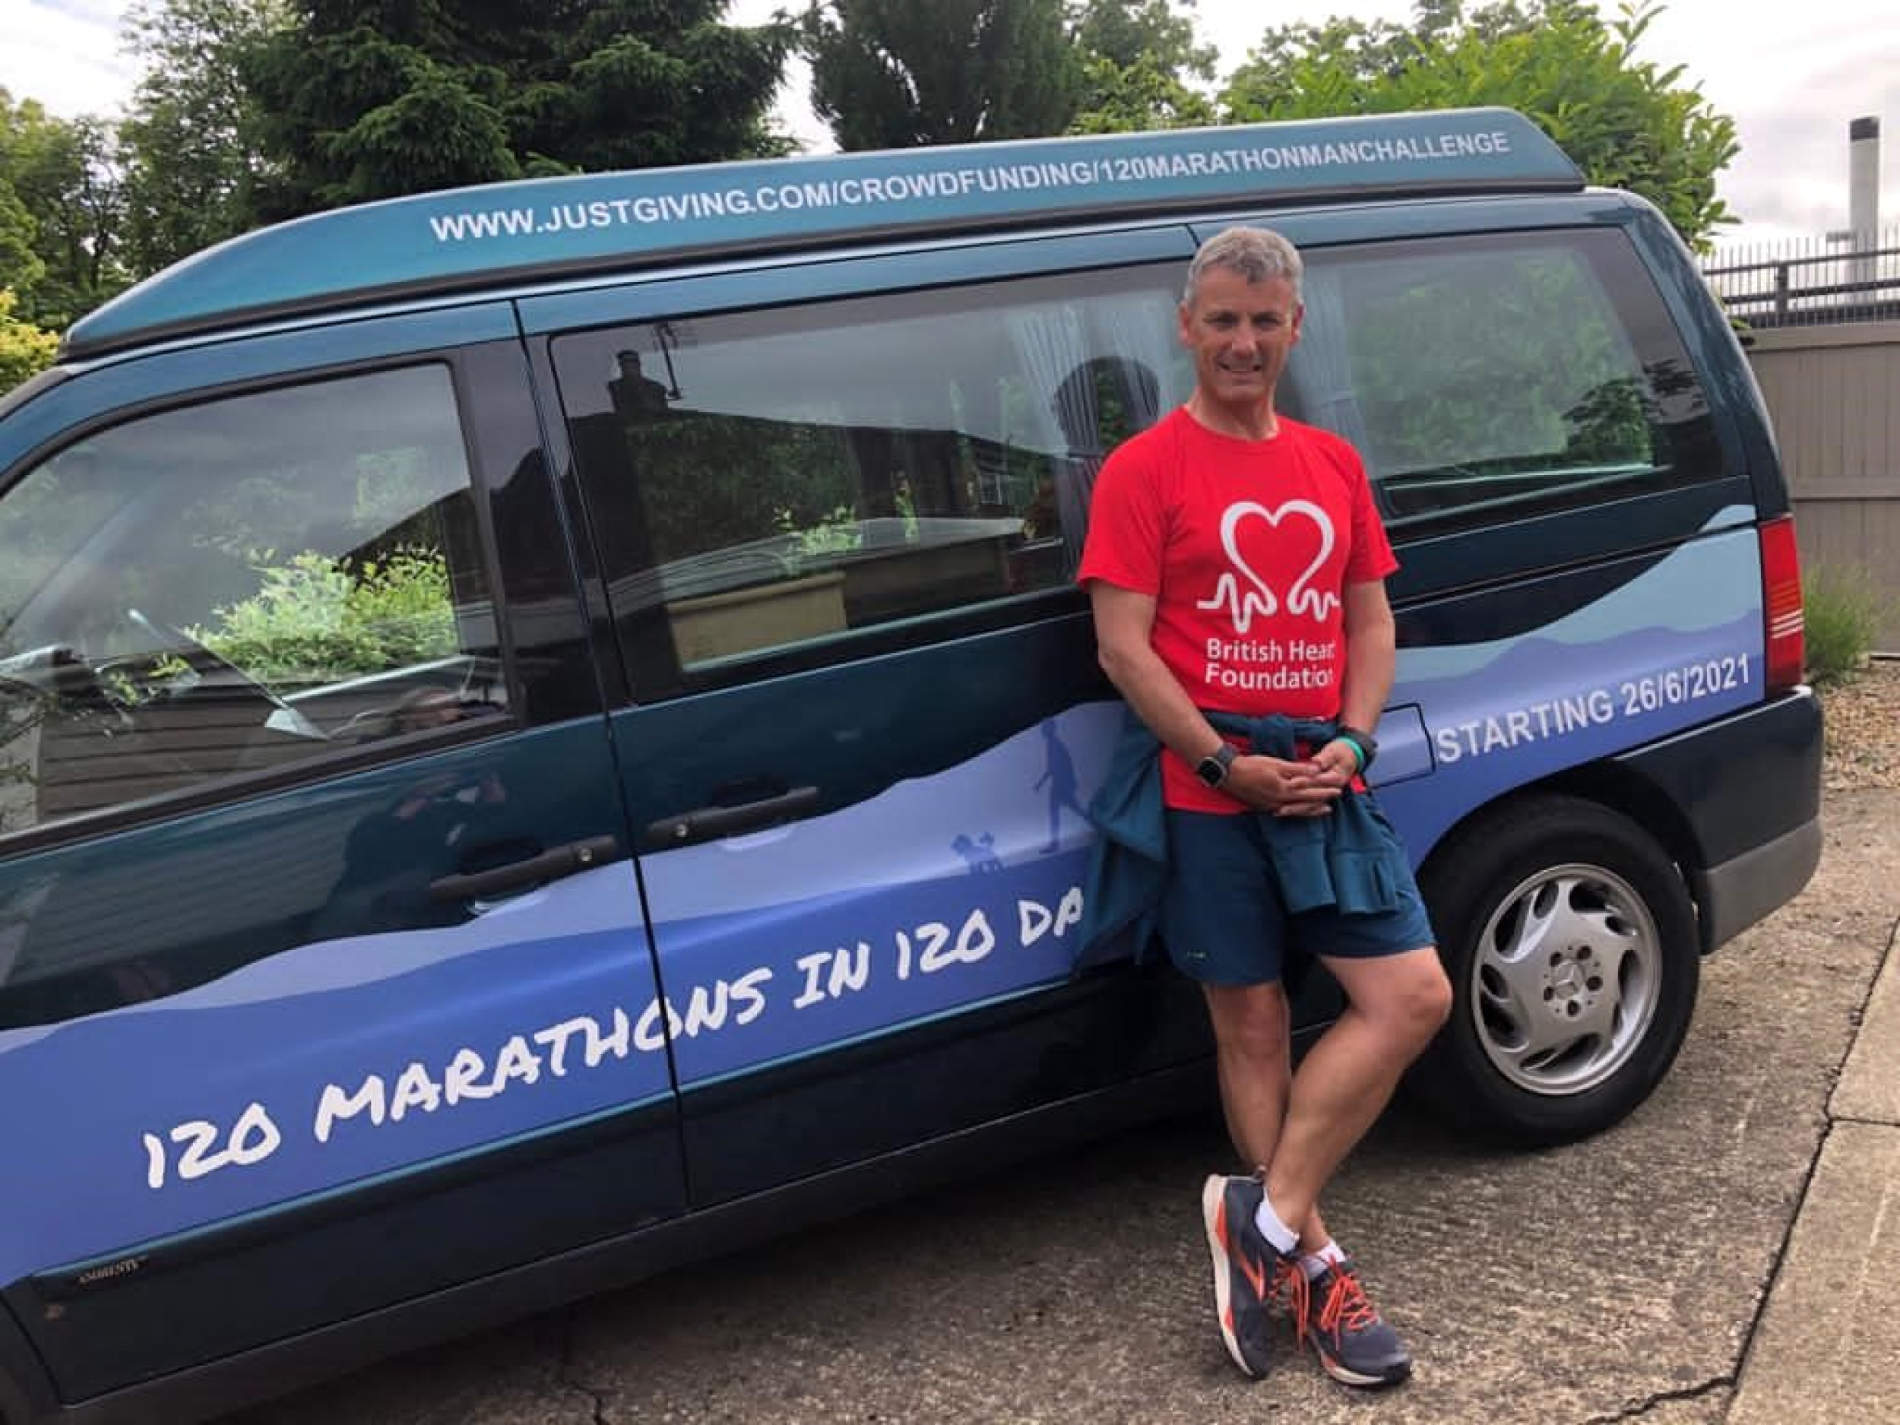 Graham Wilson will walk and run 26.5 miles a day in locations across the country